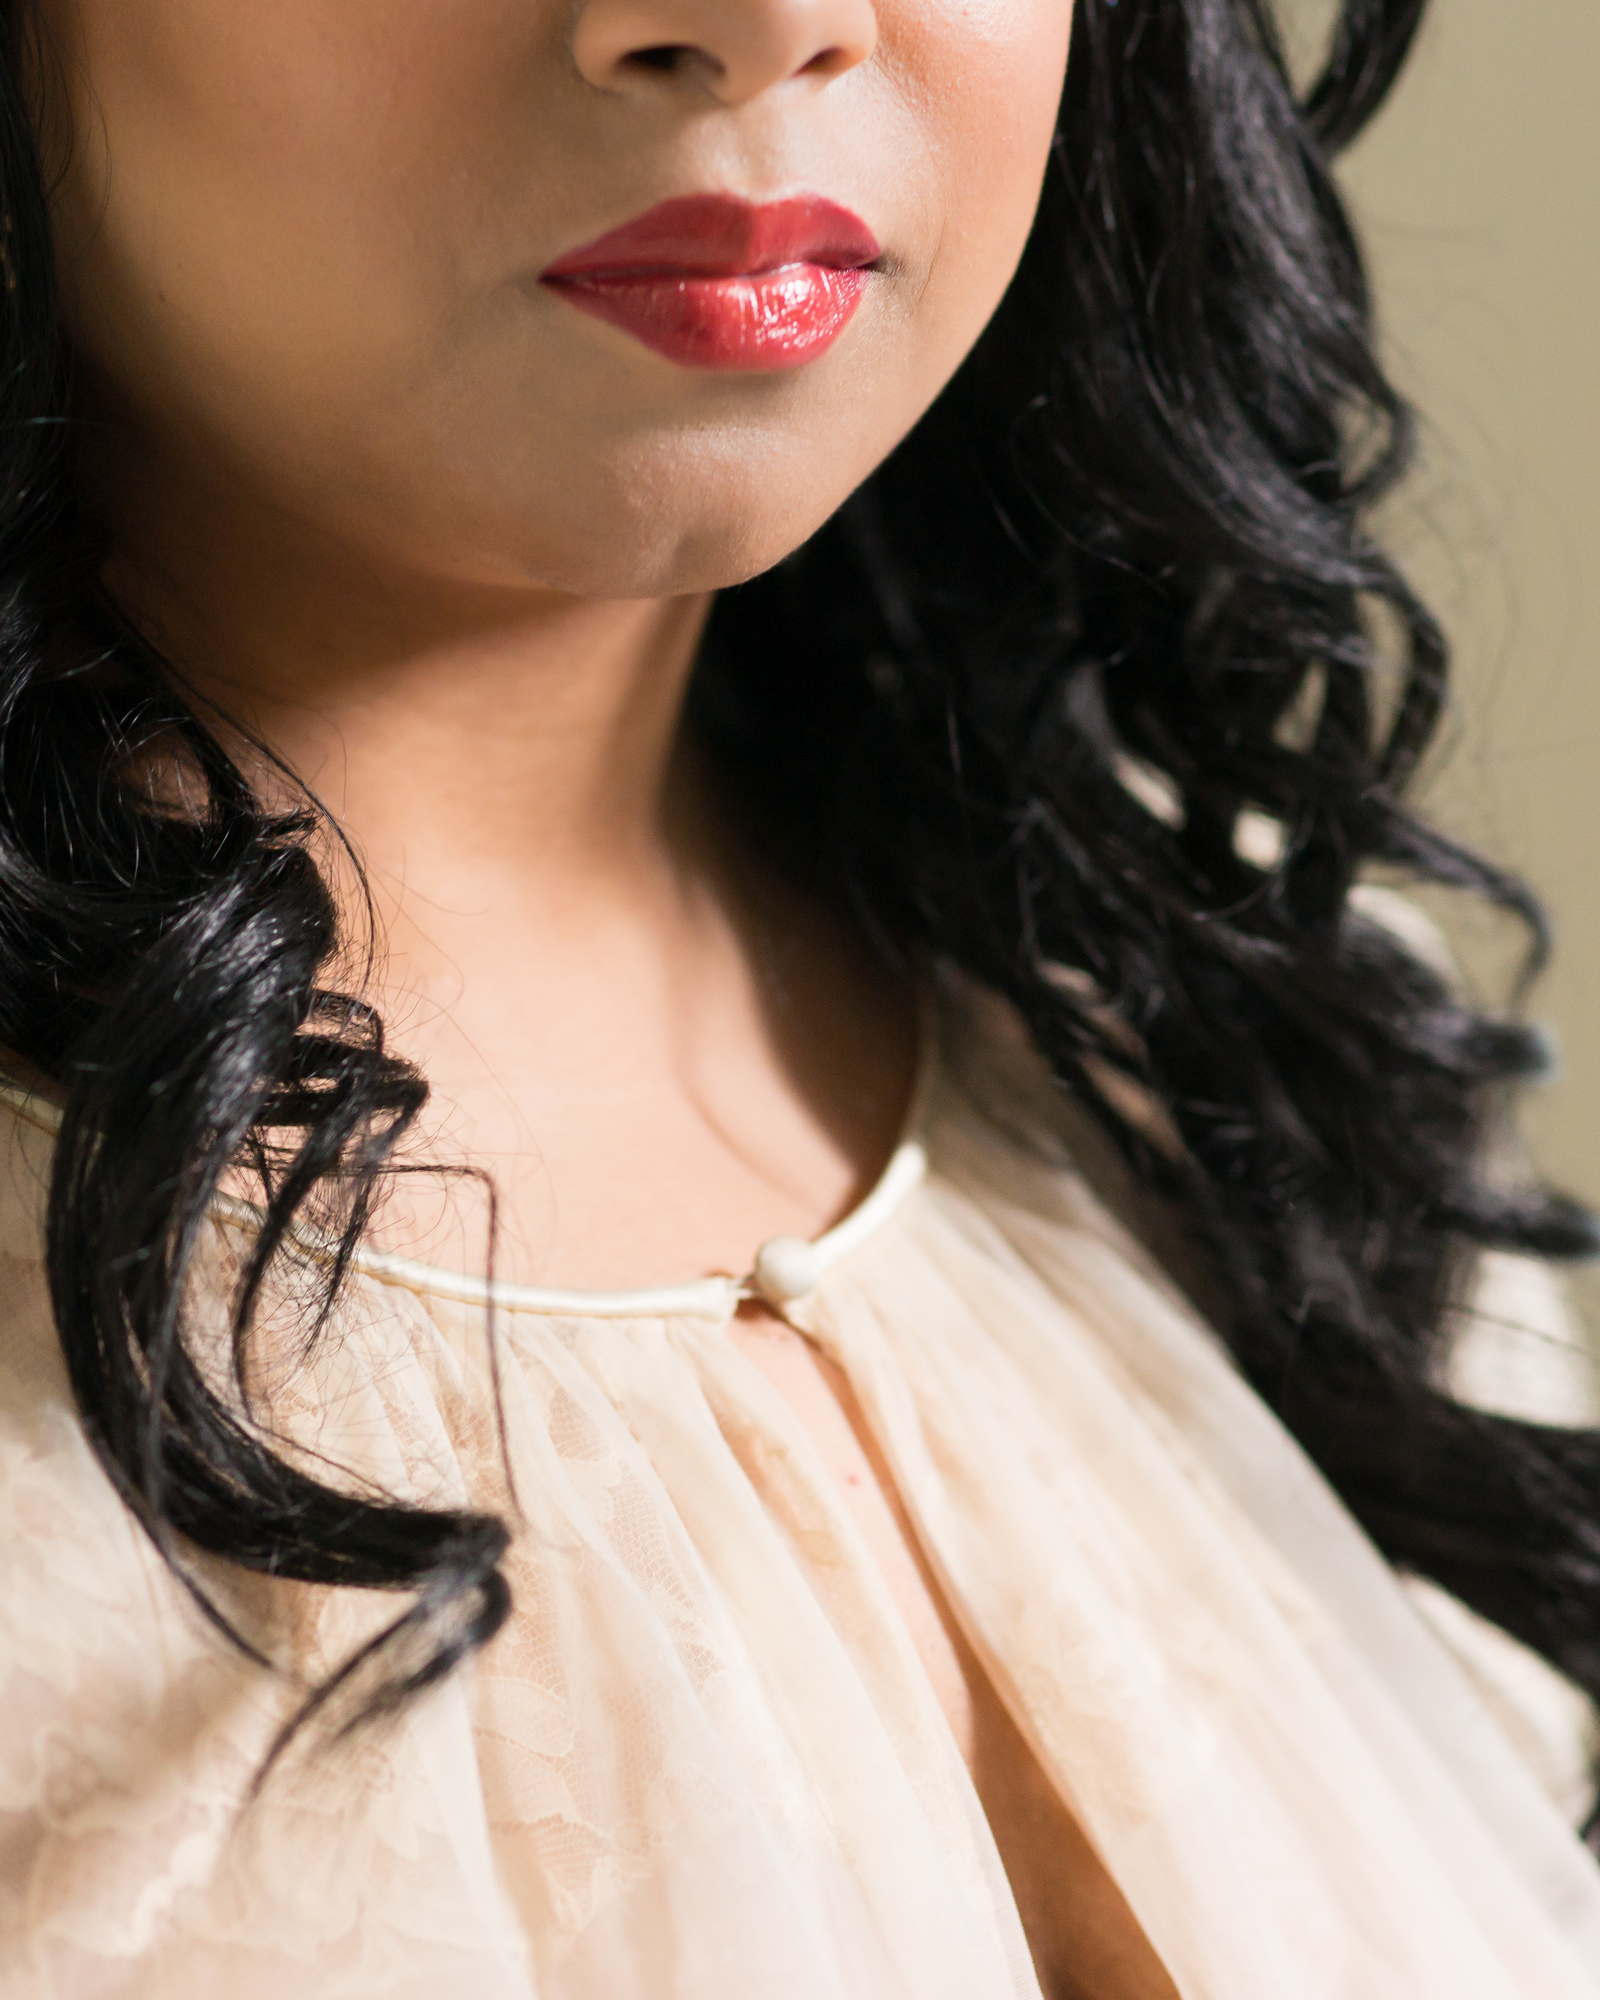 A Brown woman wearing red lipstick is shown from the nose down looking confident